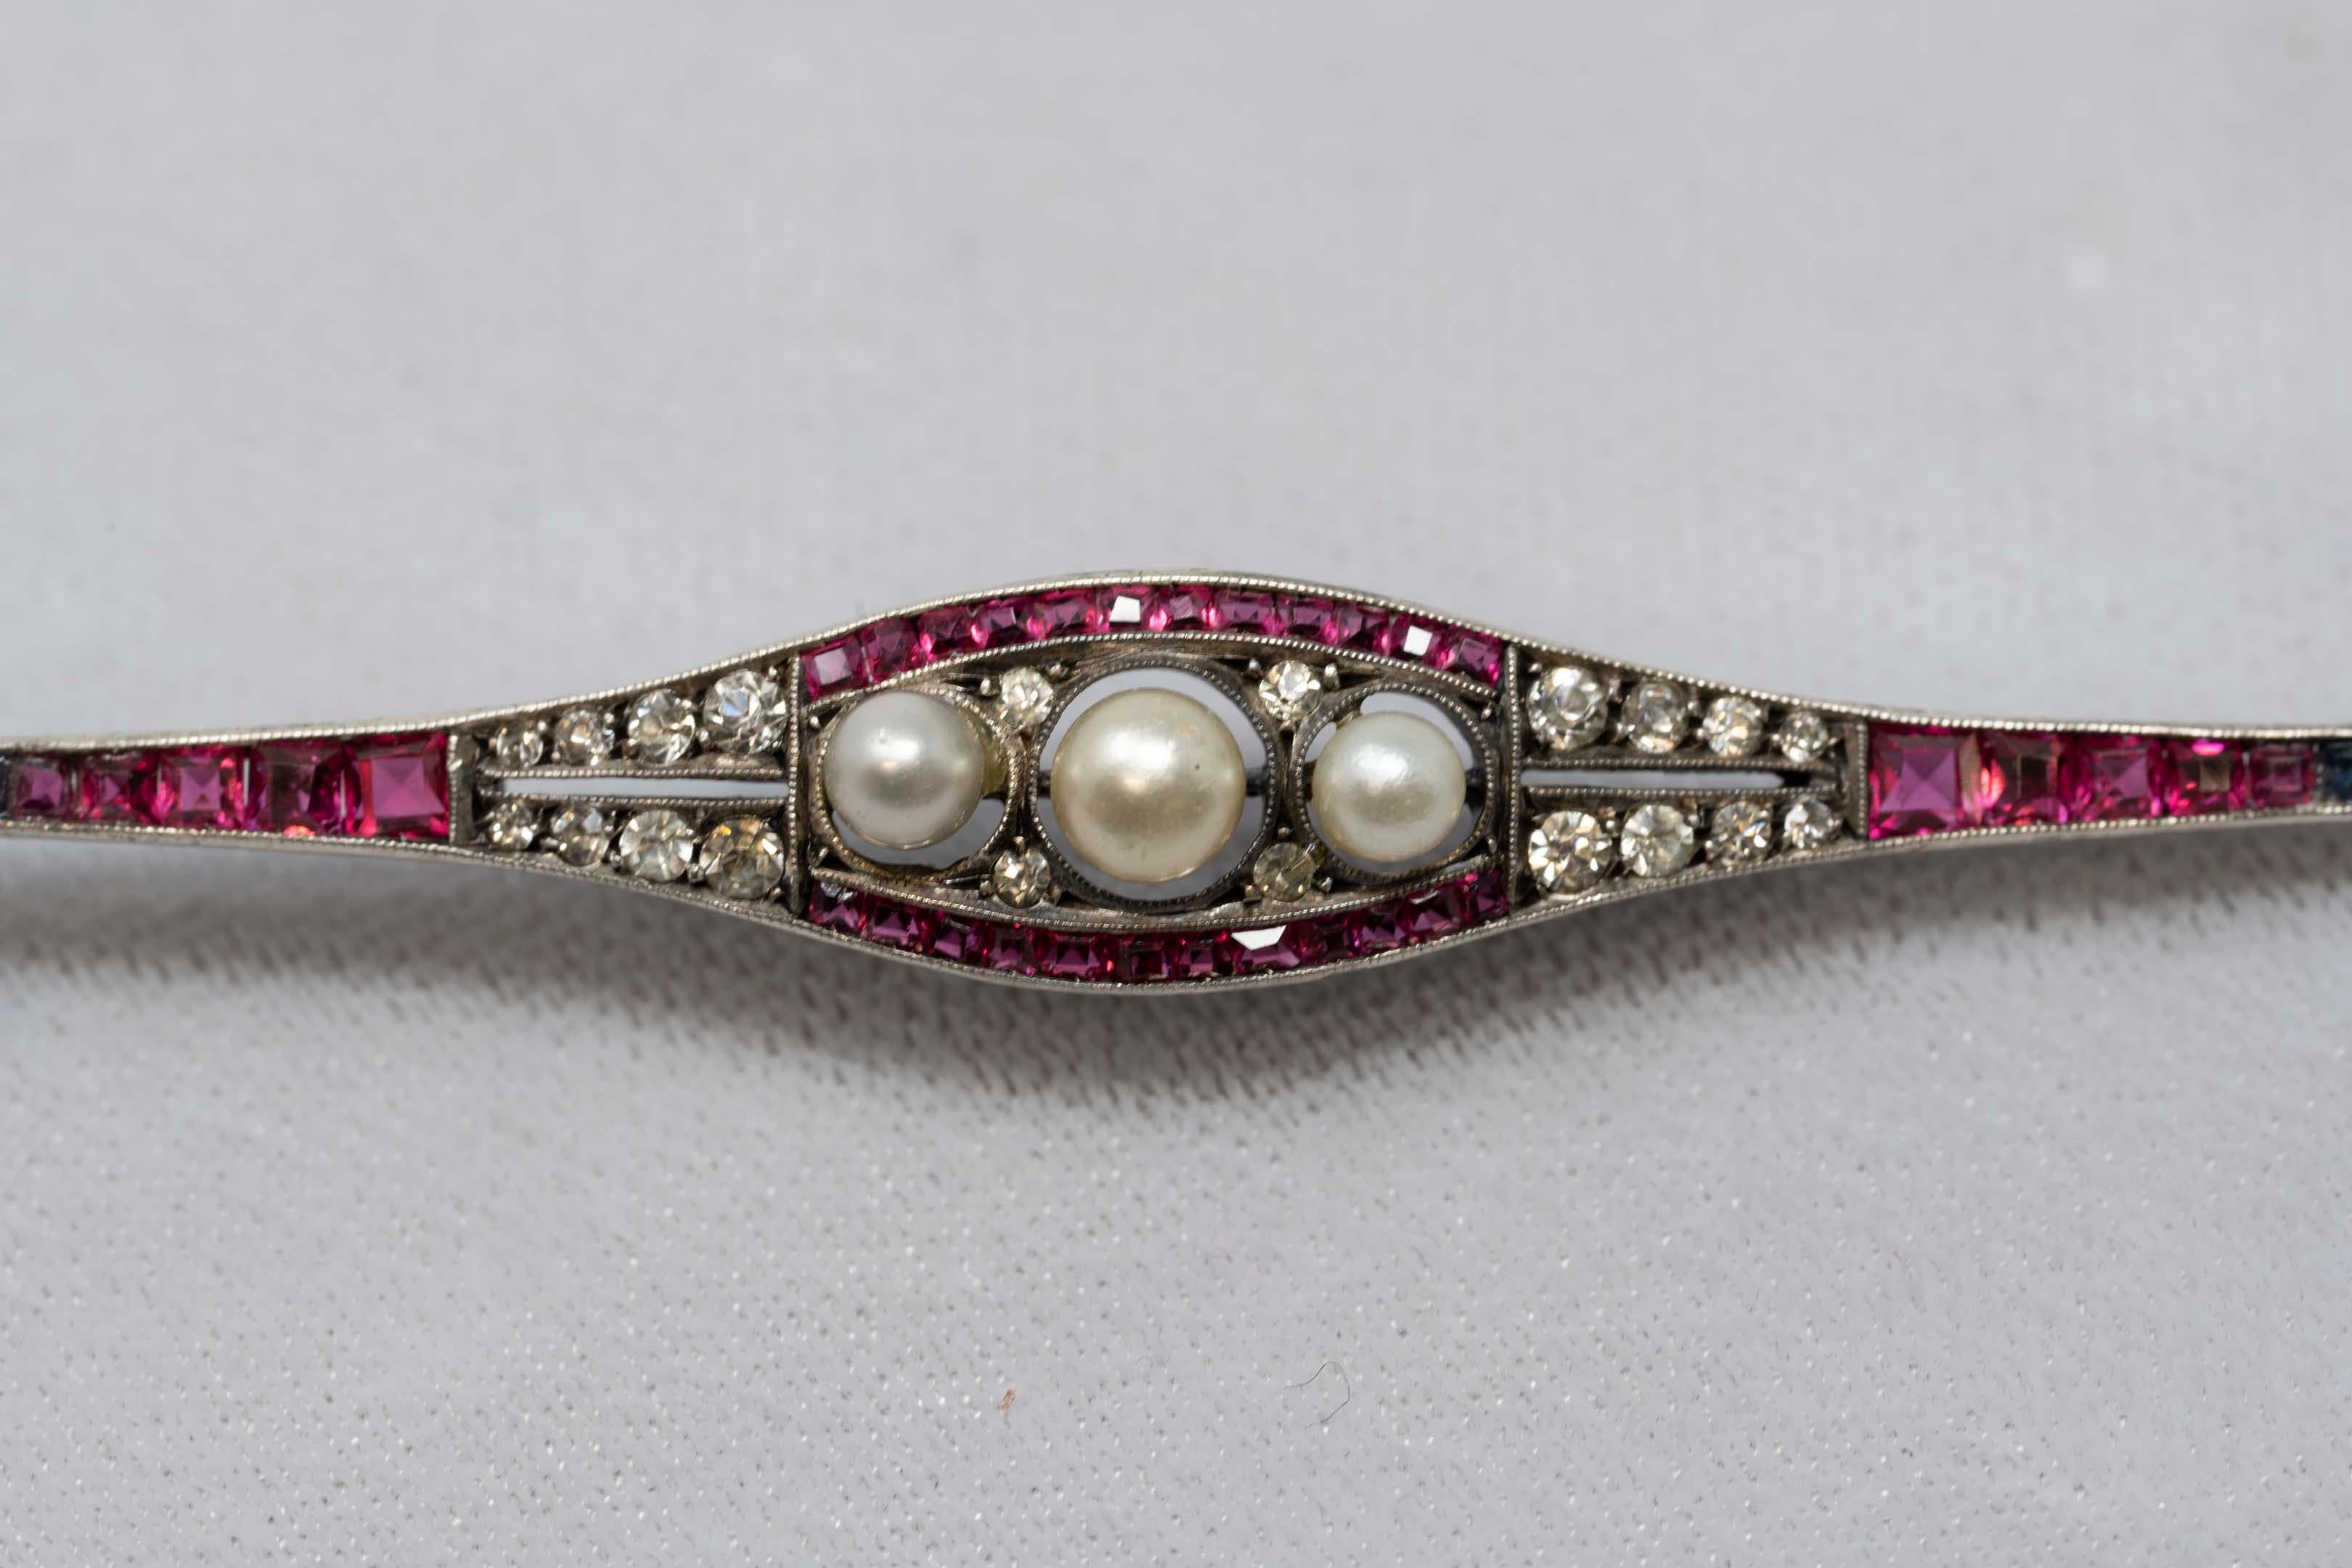 Rare W.B. Wilhelm Becker Germany art deco 935 silver brooch with faux pearls, rubies and diamante paste. Measures 3 1/2 inches long, stamped inside 935 W.B. sterling, rhodium plated, round cut and square stone. Circa 1920, Germany.
